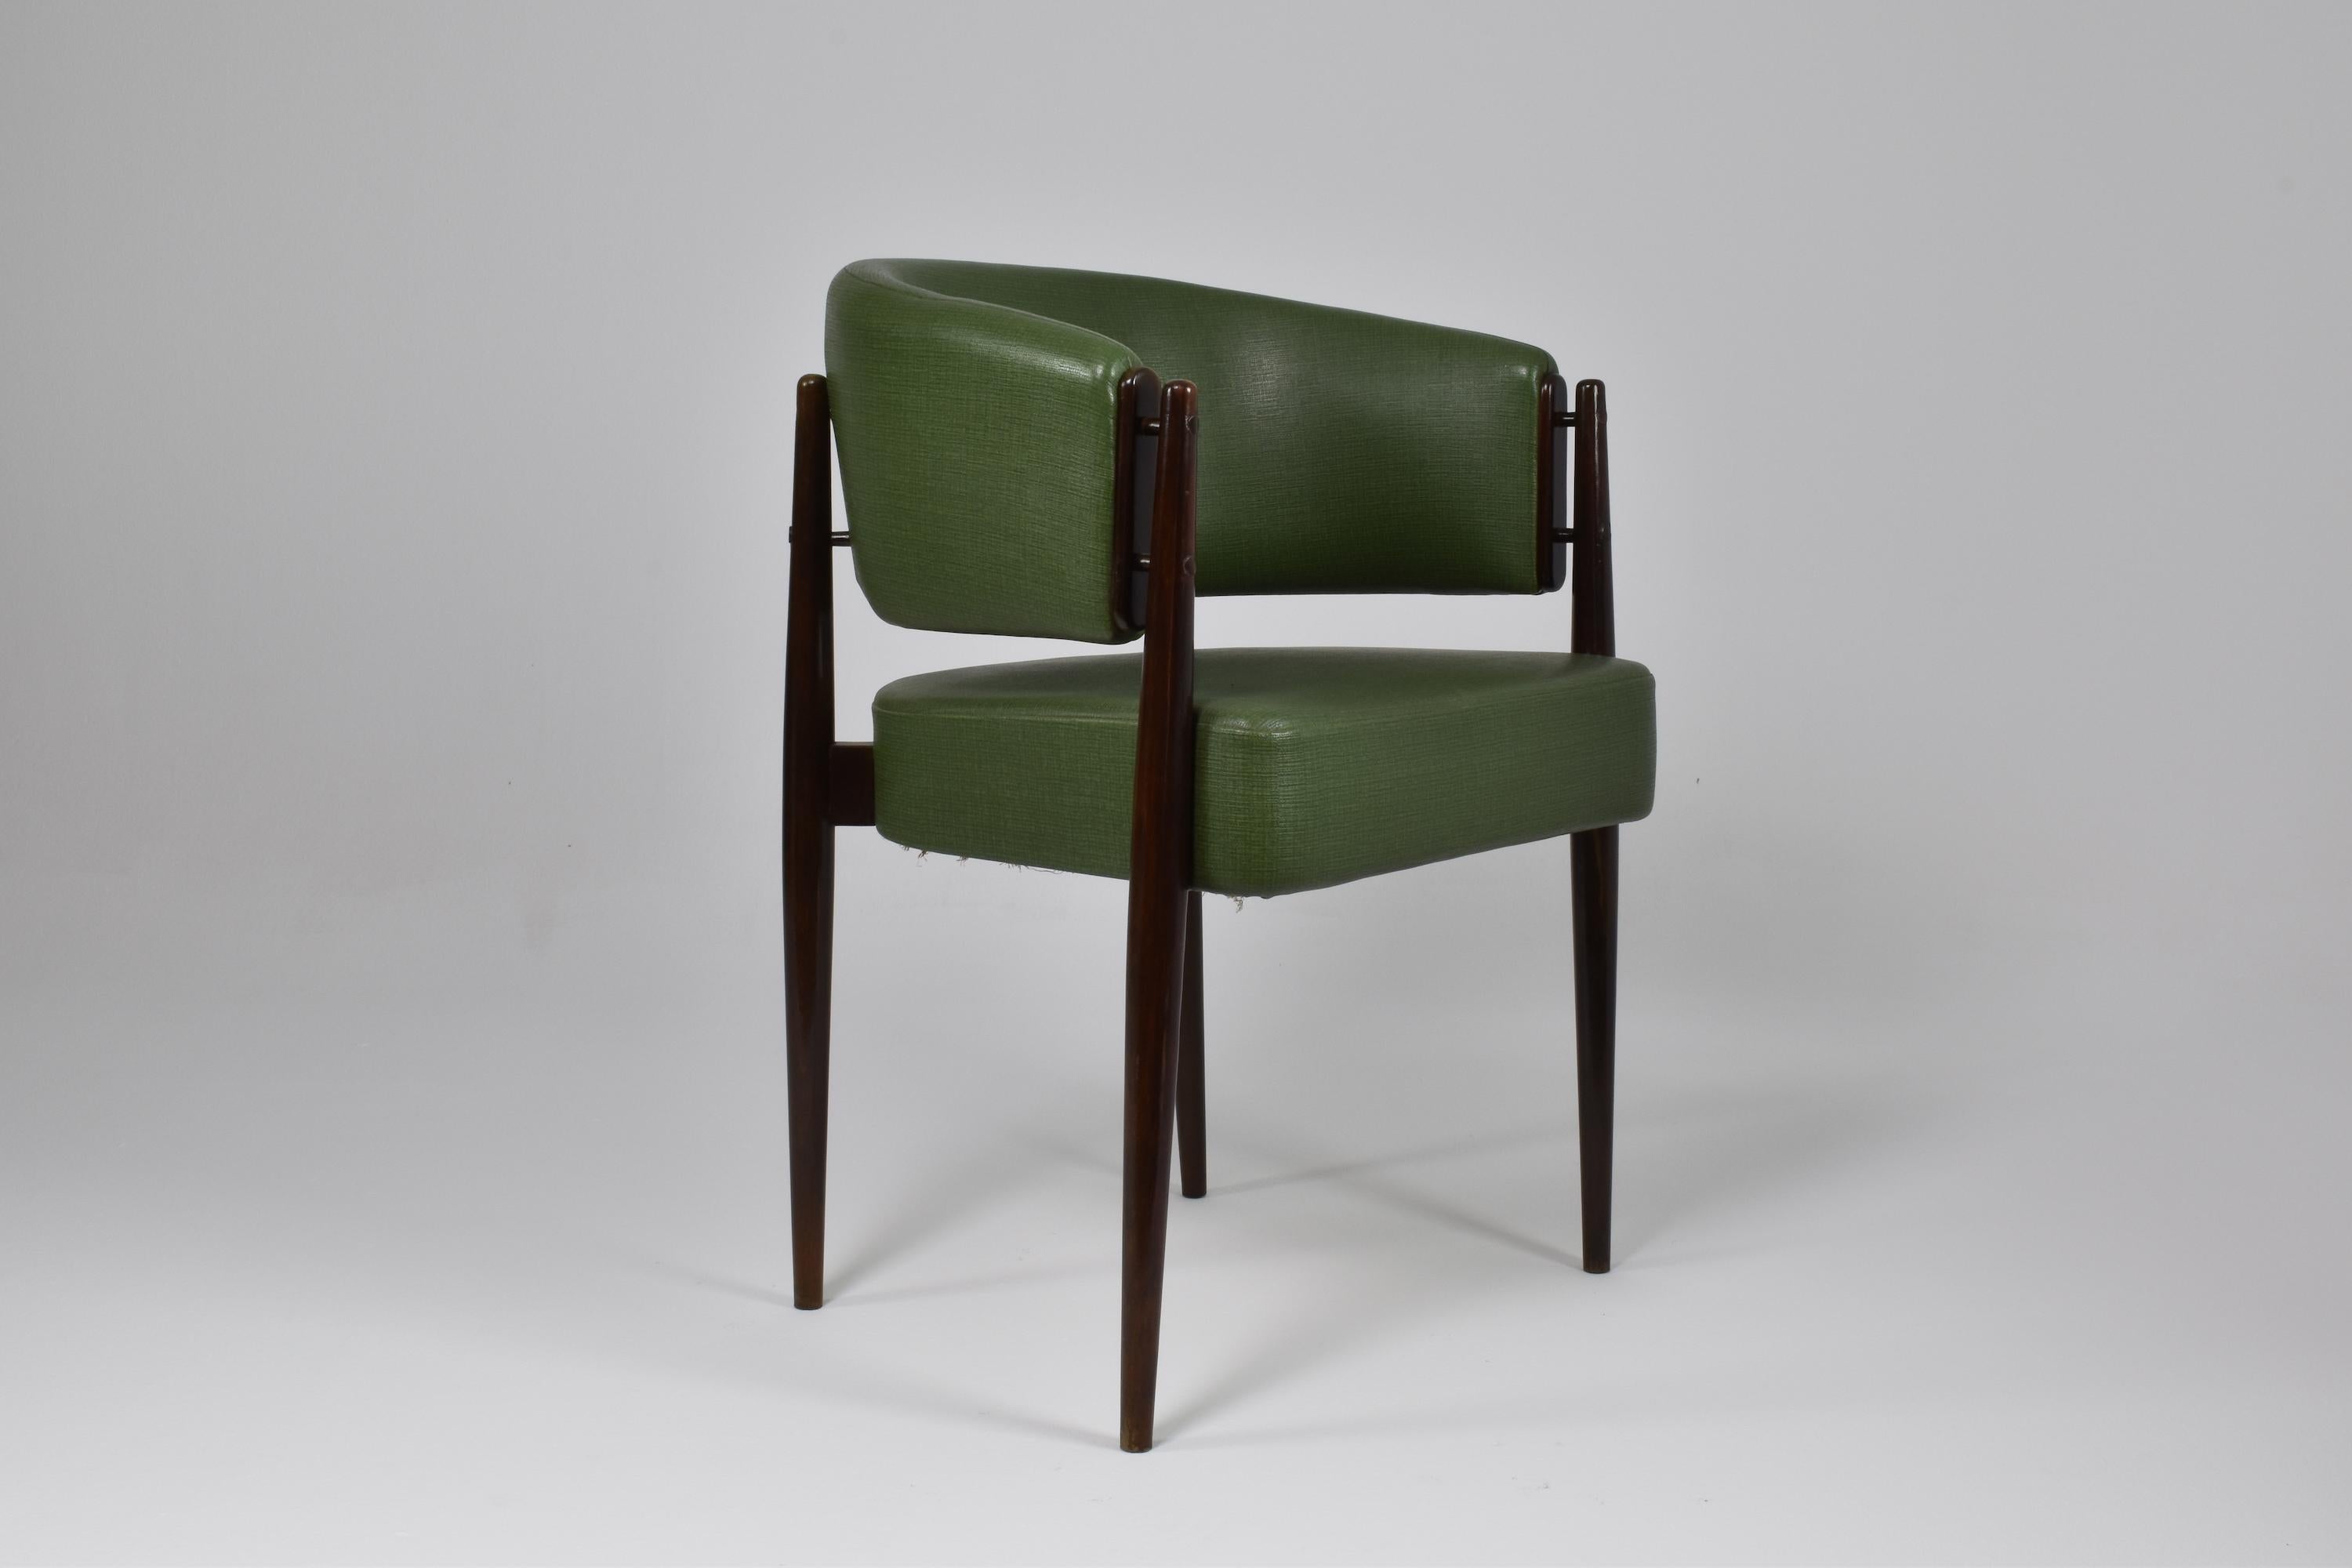 A 20th-century vintage side chair or club chair in it's original green faux leather upholstery and fine impeccably restored beechwood structure. This piece was selected for its beautiful design, comfortable seating with its circular backrest, and